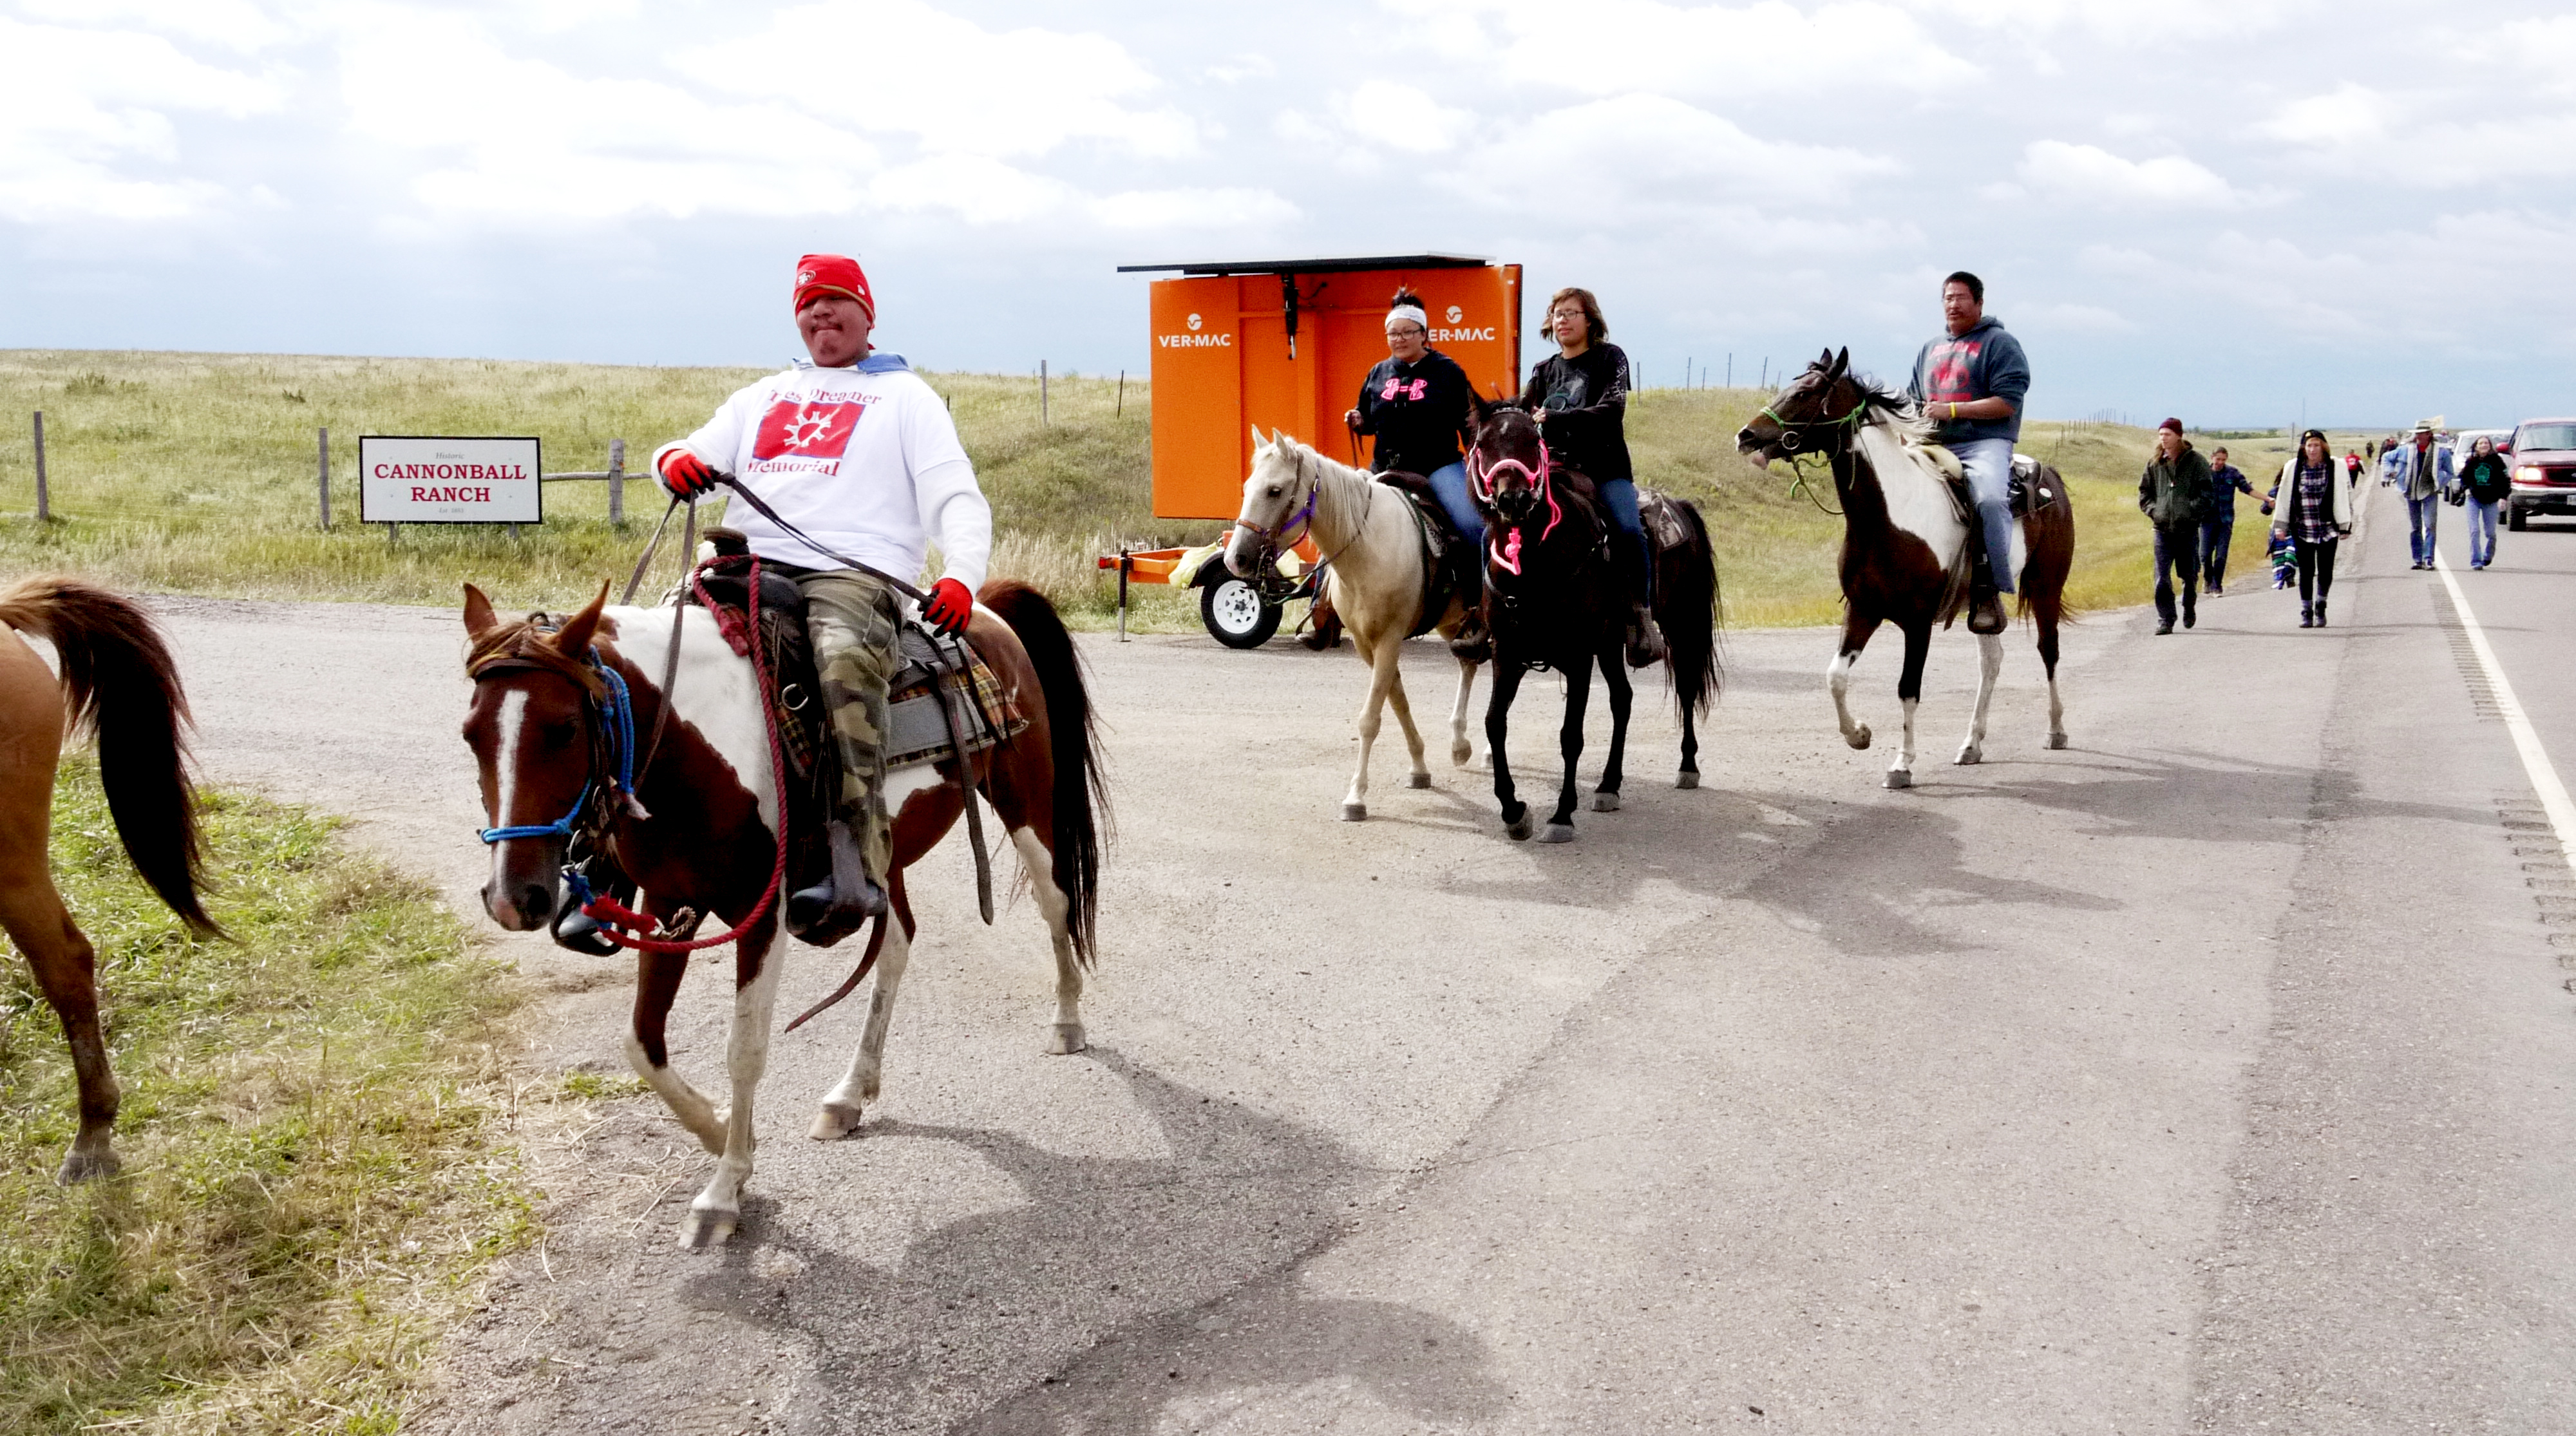 Horseback riders march from the Oceti Sakowin Camp to the Dakota Access Pipeline construction site, Sept. 13, 2016. (Sarah Jaffe for BillMoyers.com)